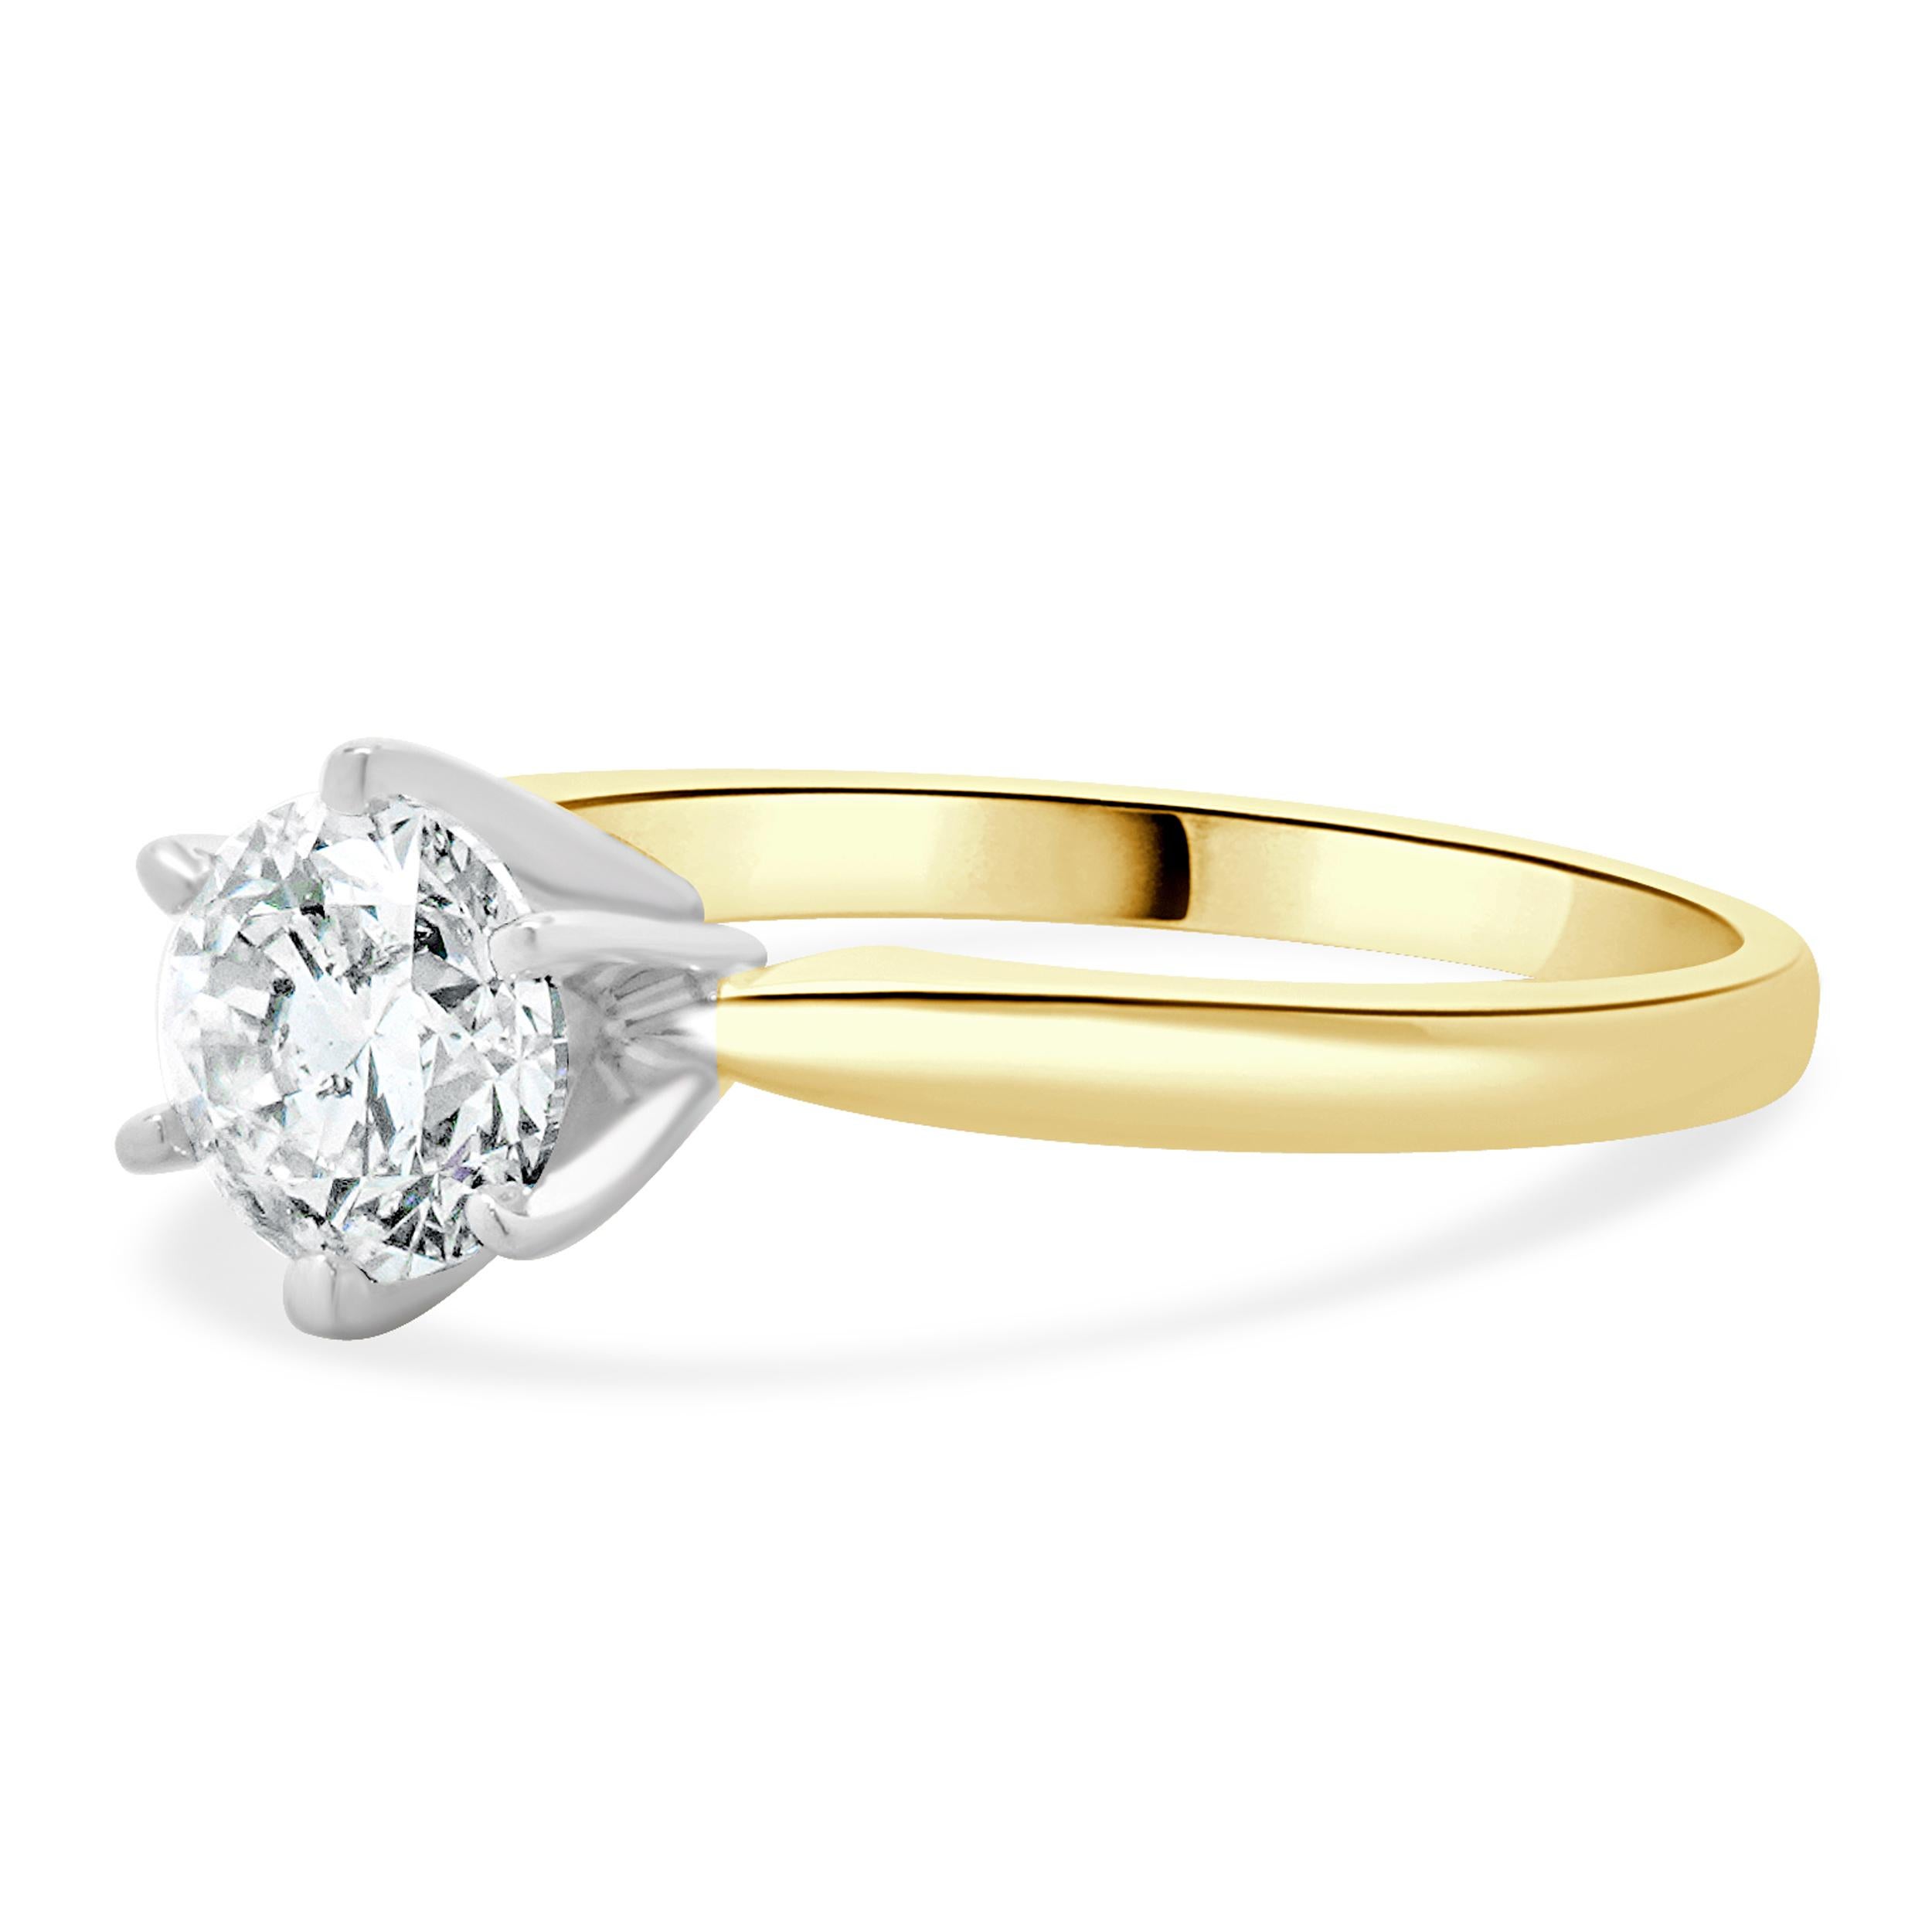 Designer: custom
Material: 14K yellow & white gold
Diamond:  1 round brilliant cut = 1.02ct
Color: I
Clarity: I2
Dimensions: ring top measures 6.31mm wide
Ring Size: 7 (complimentary sizing available)
Weight: 2.57 grams
